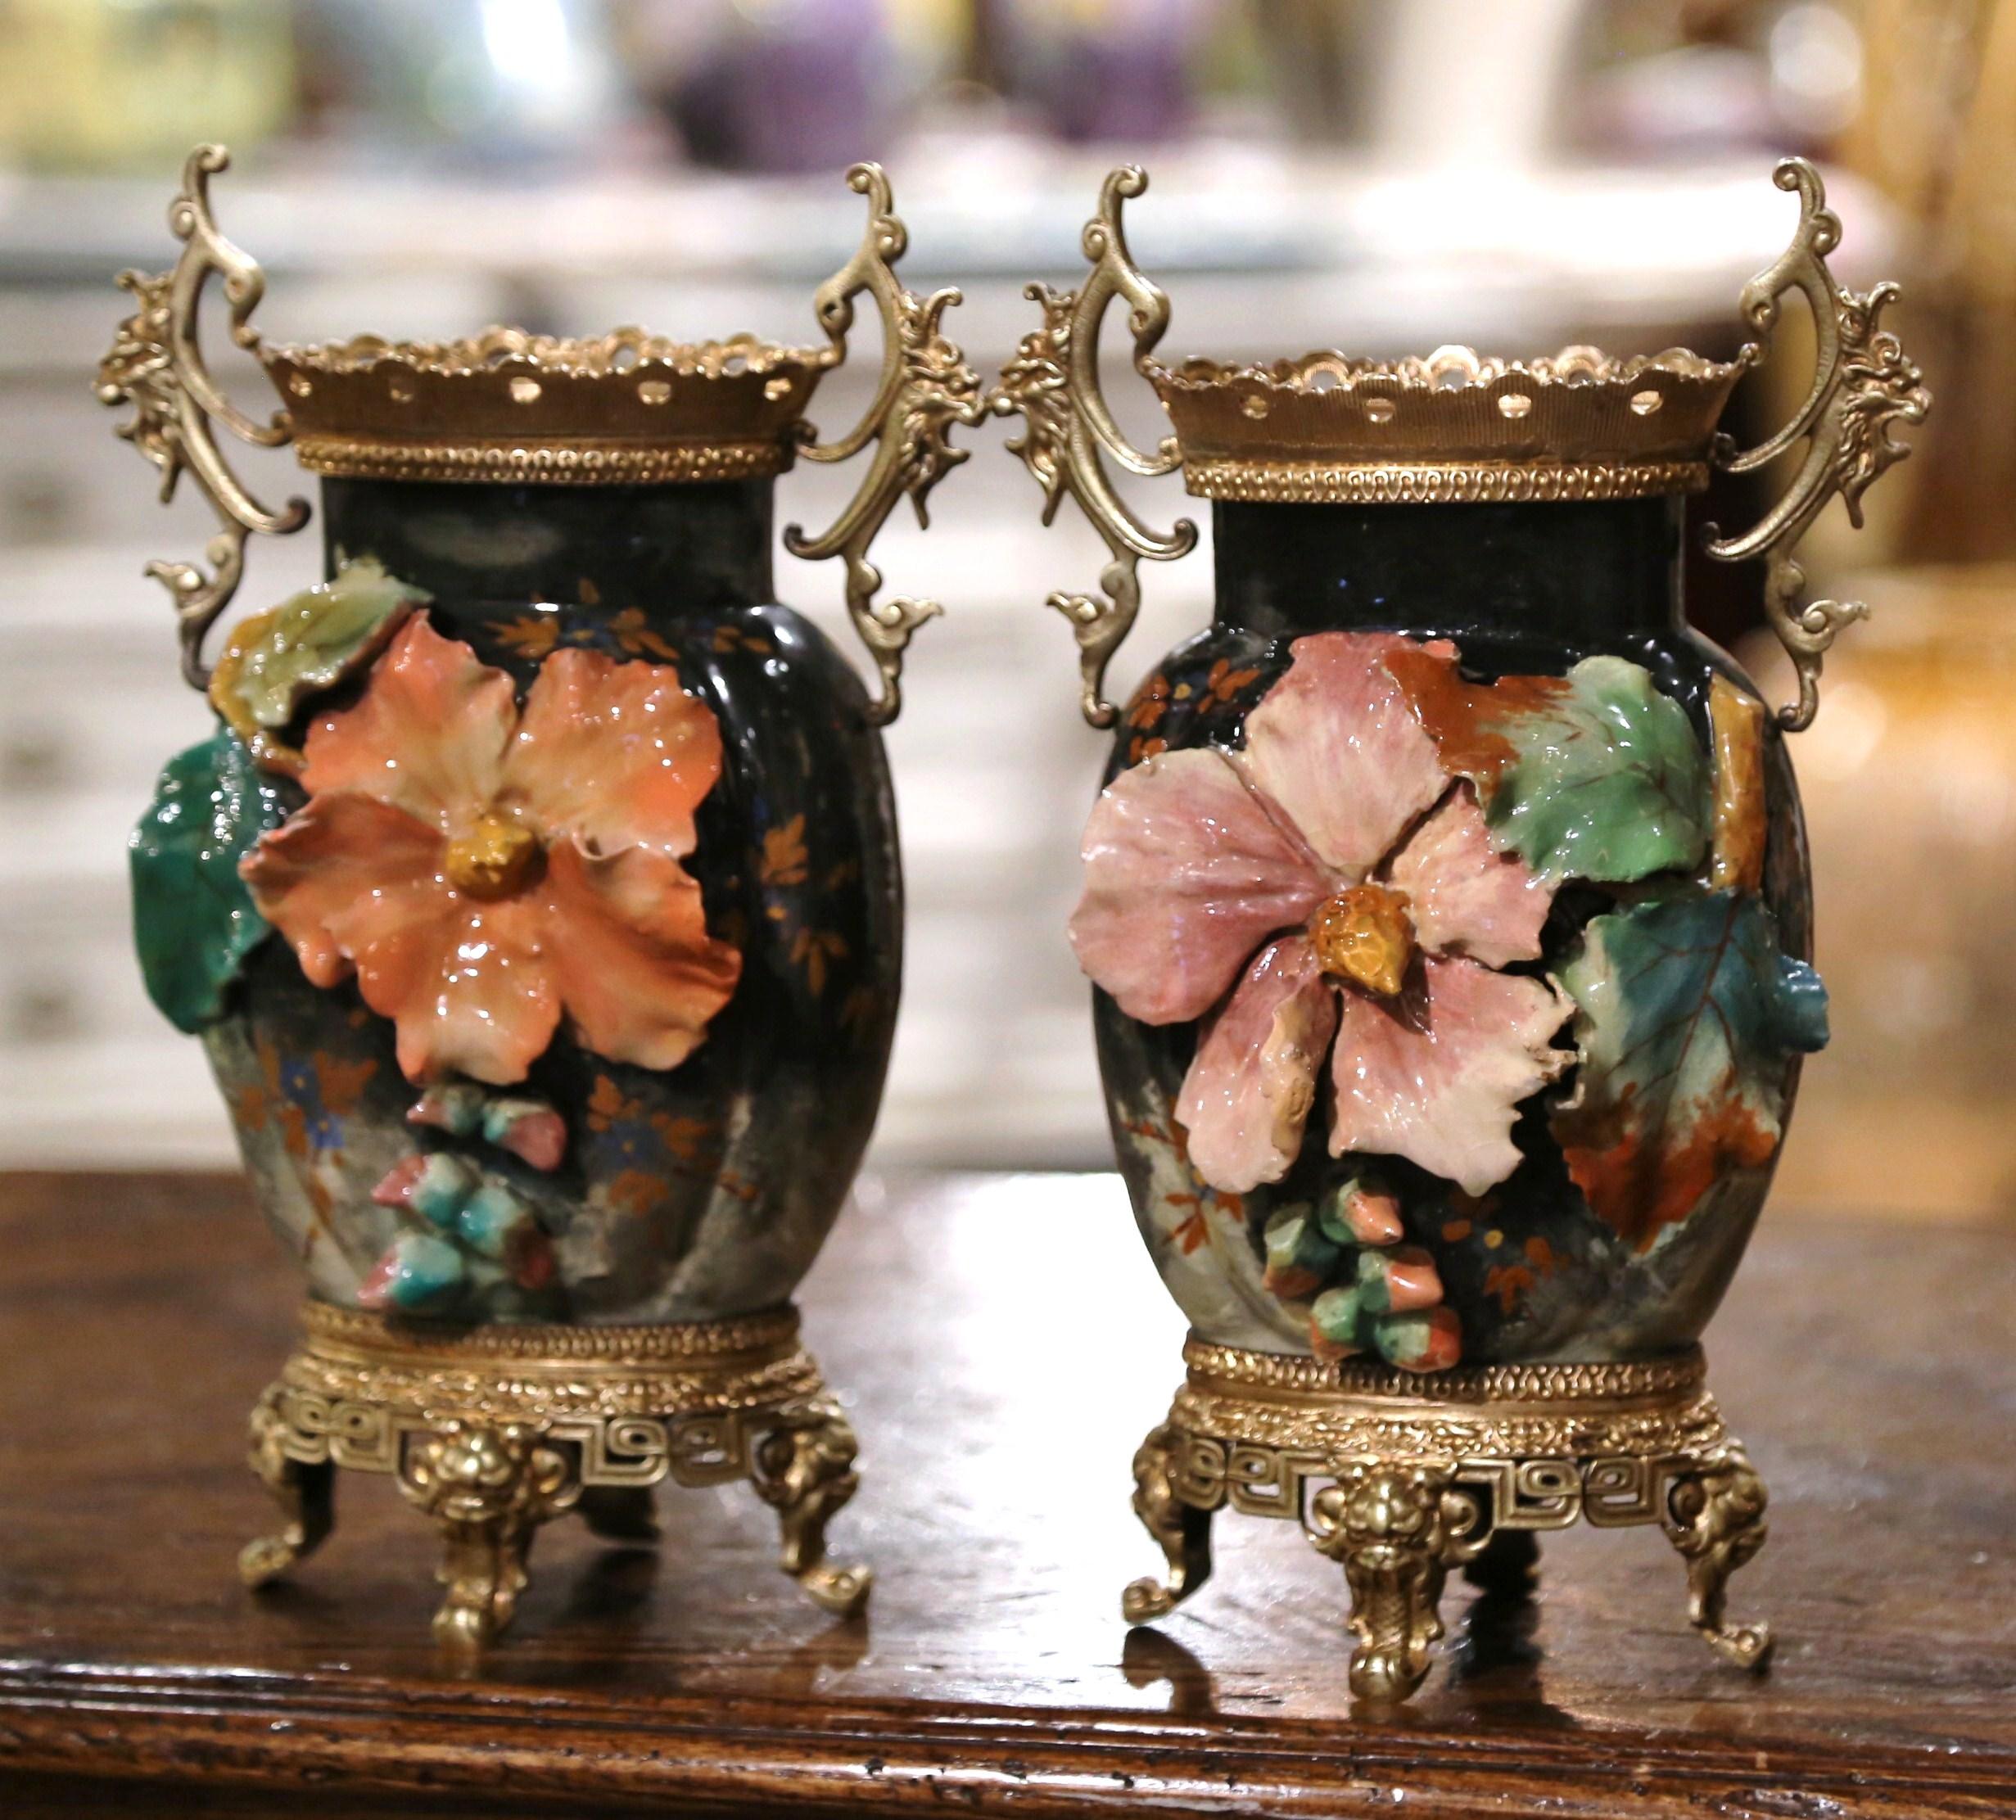 Decorate a kitchen counter or a shelf with this elegant pair of antique Majolica vases. Crafted in Montigny sur Loing, France, circa 1860, each ornate vase sits on an ornate brass base ending with mask scrolled feet; it is further decorated at the